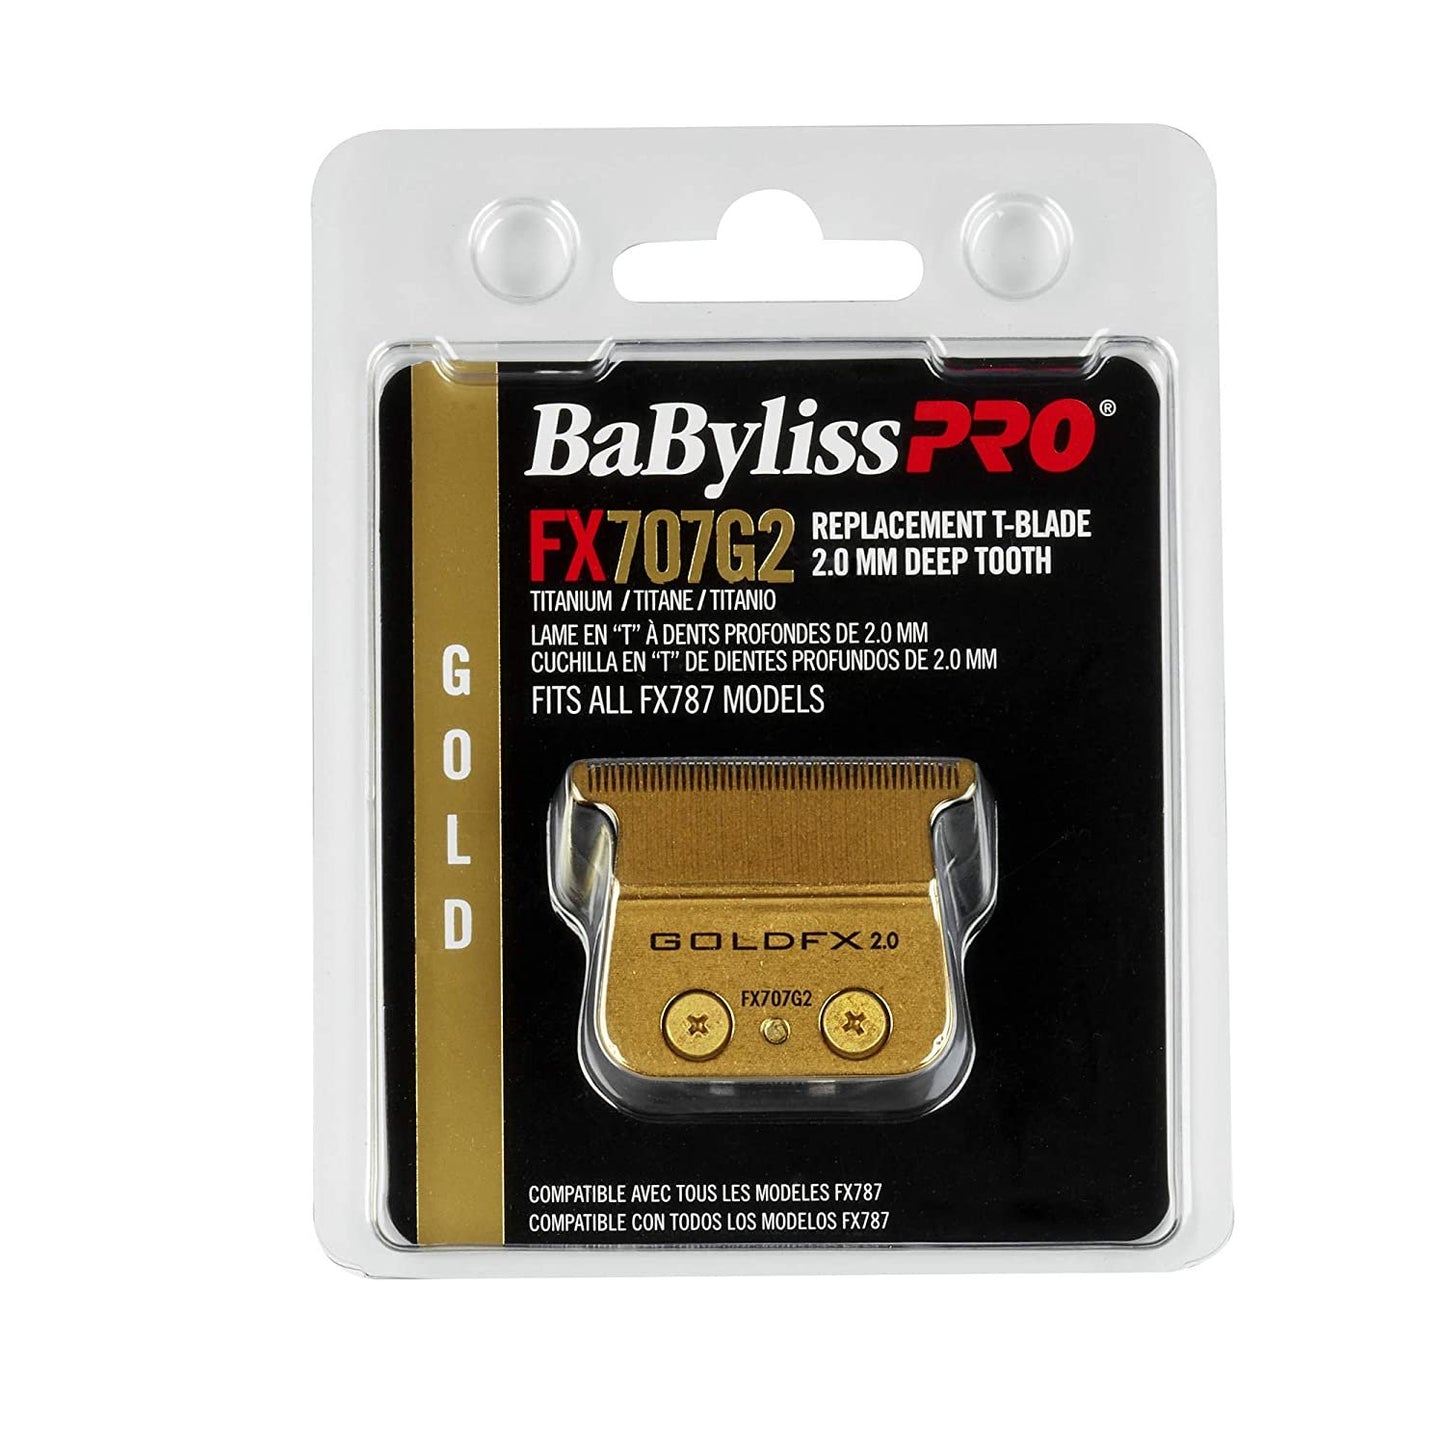 Babyliss Pro FX707G2 Replacement GoldFX Skeleton T-Blade Deep Tooth | Babyliss